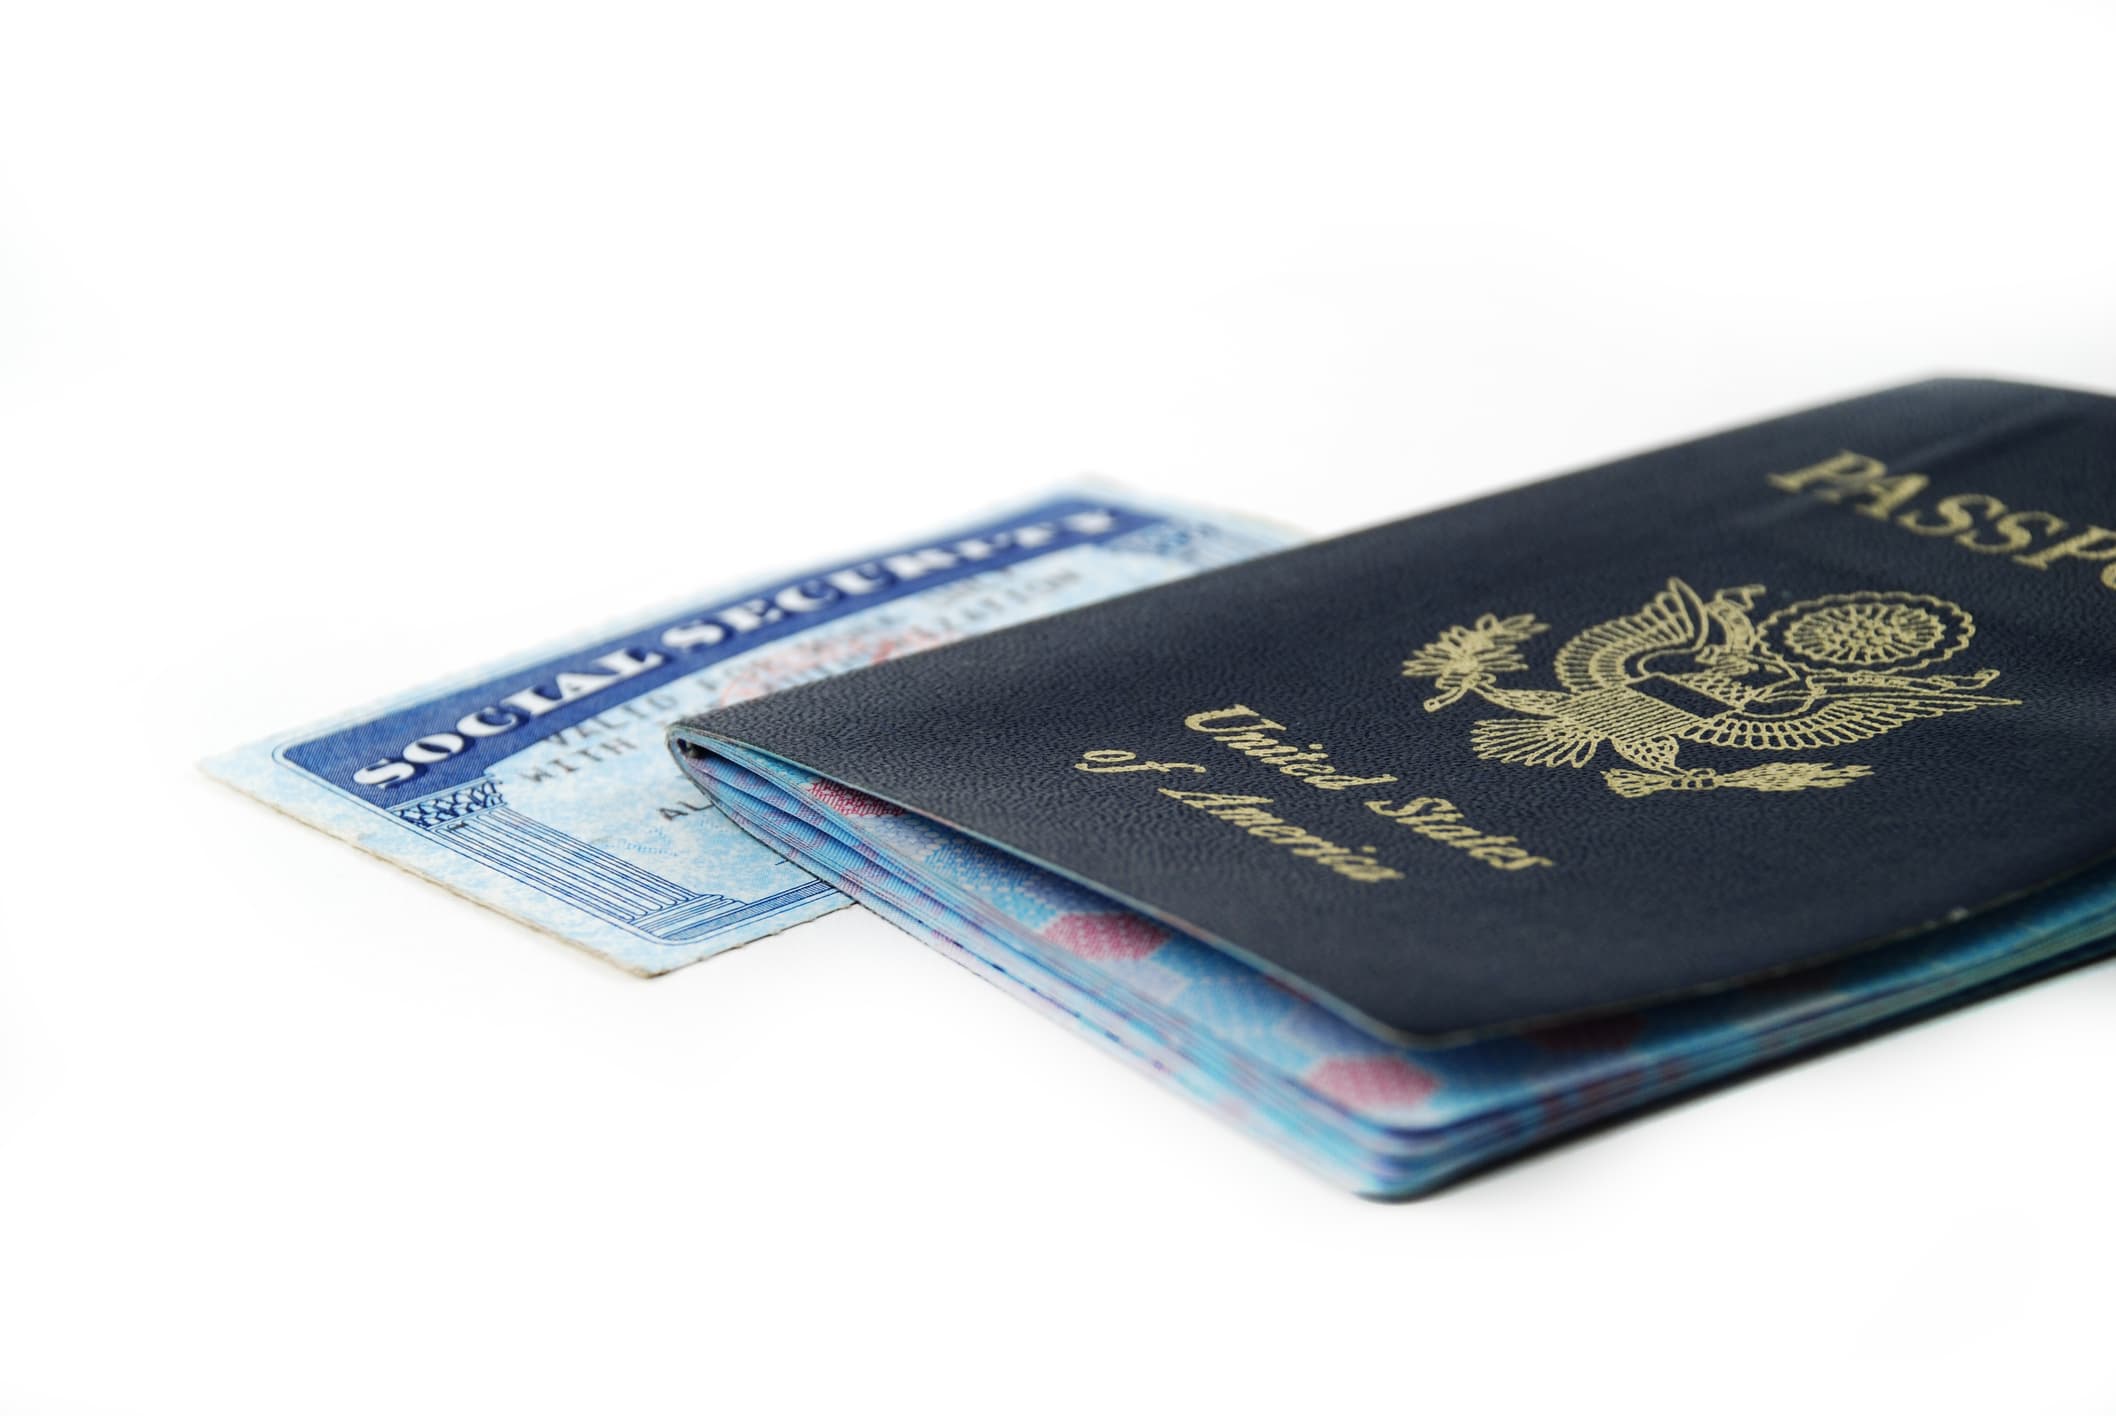 A social security card and passport